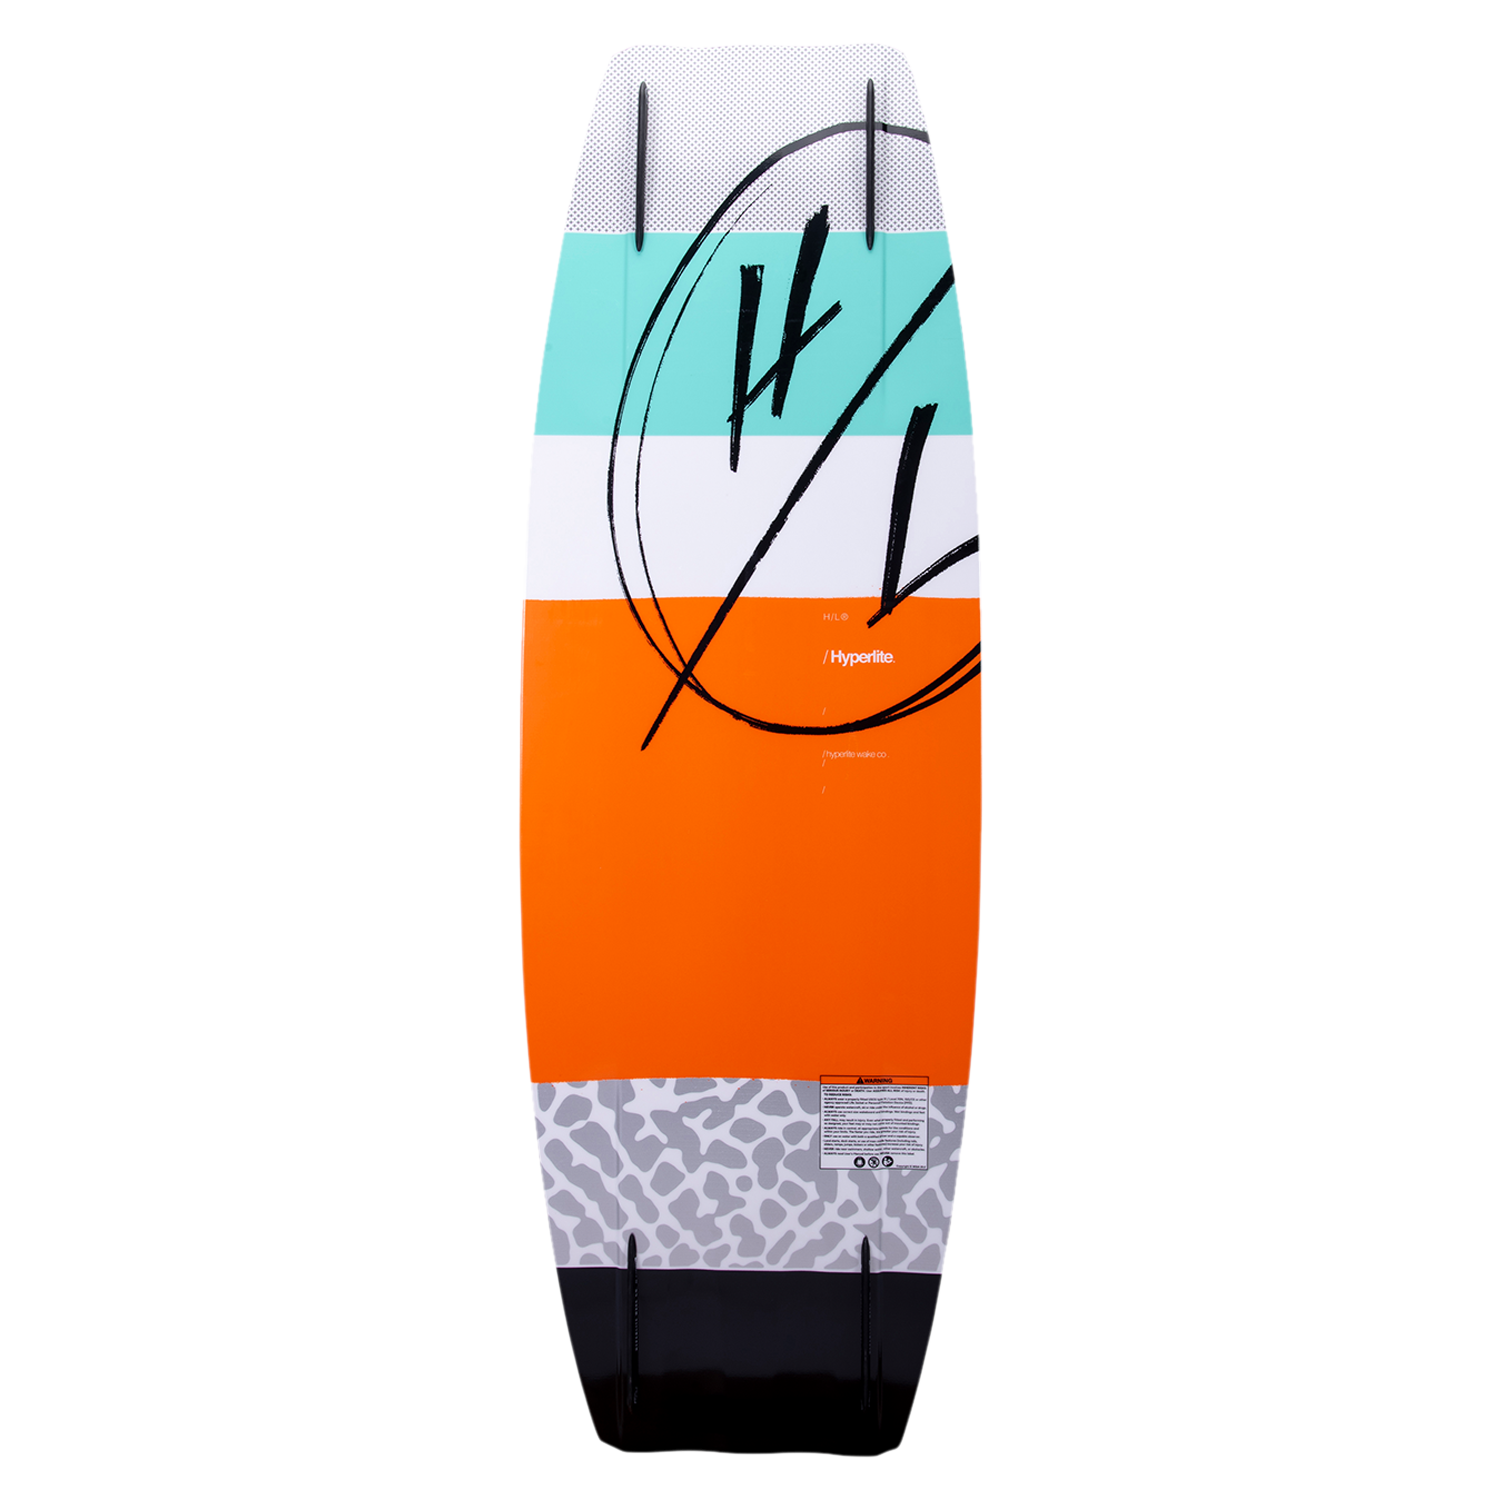 A Hyperlite 2023 Source Wakeboard with an orange, blue and white design that provides excellent pop with its 3-Stage Rocker.